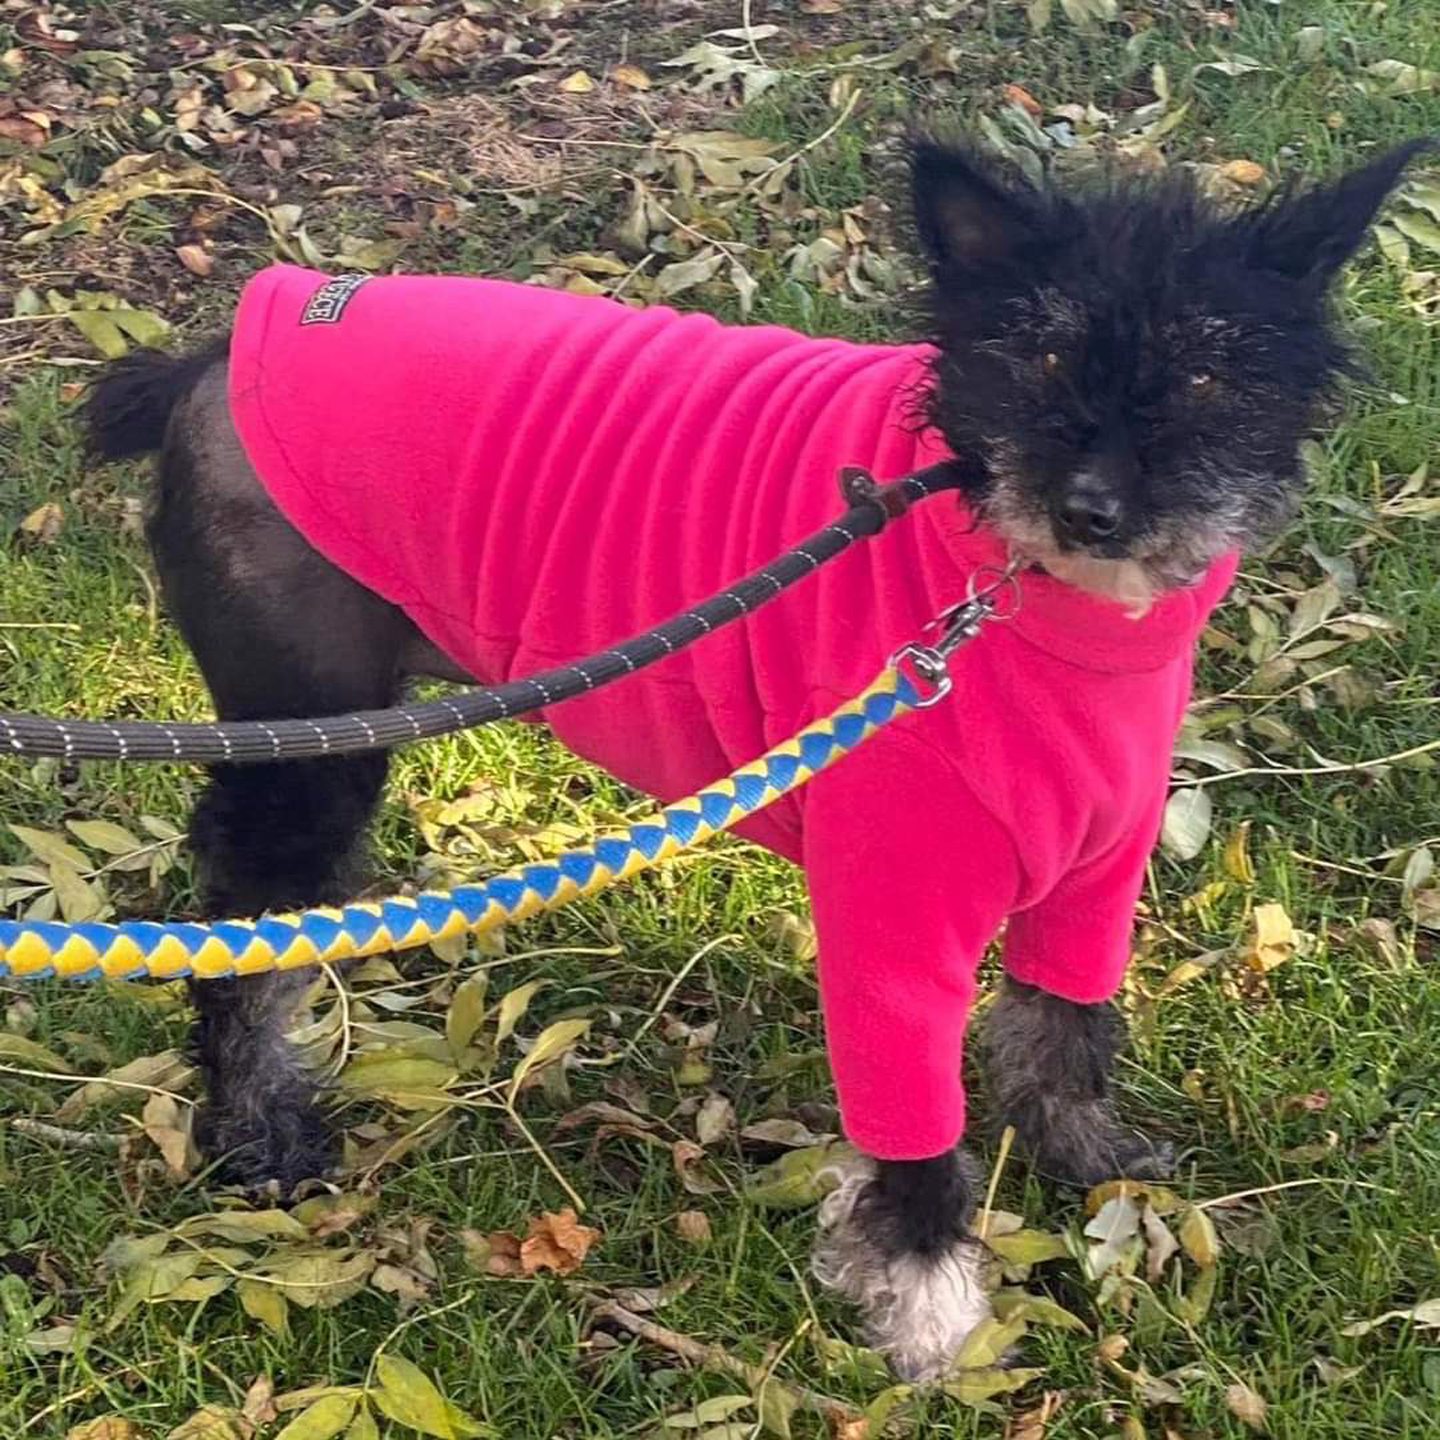 Sharleen out on a walk in a pink jumper.